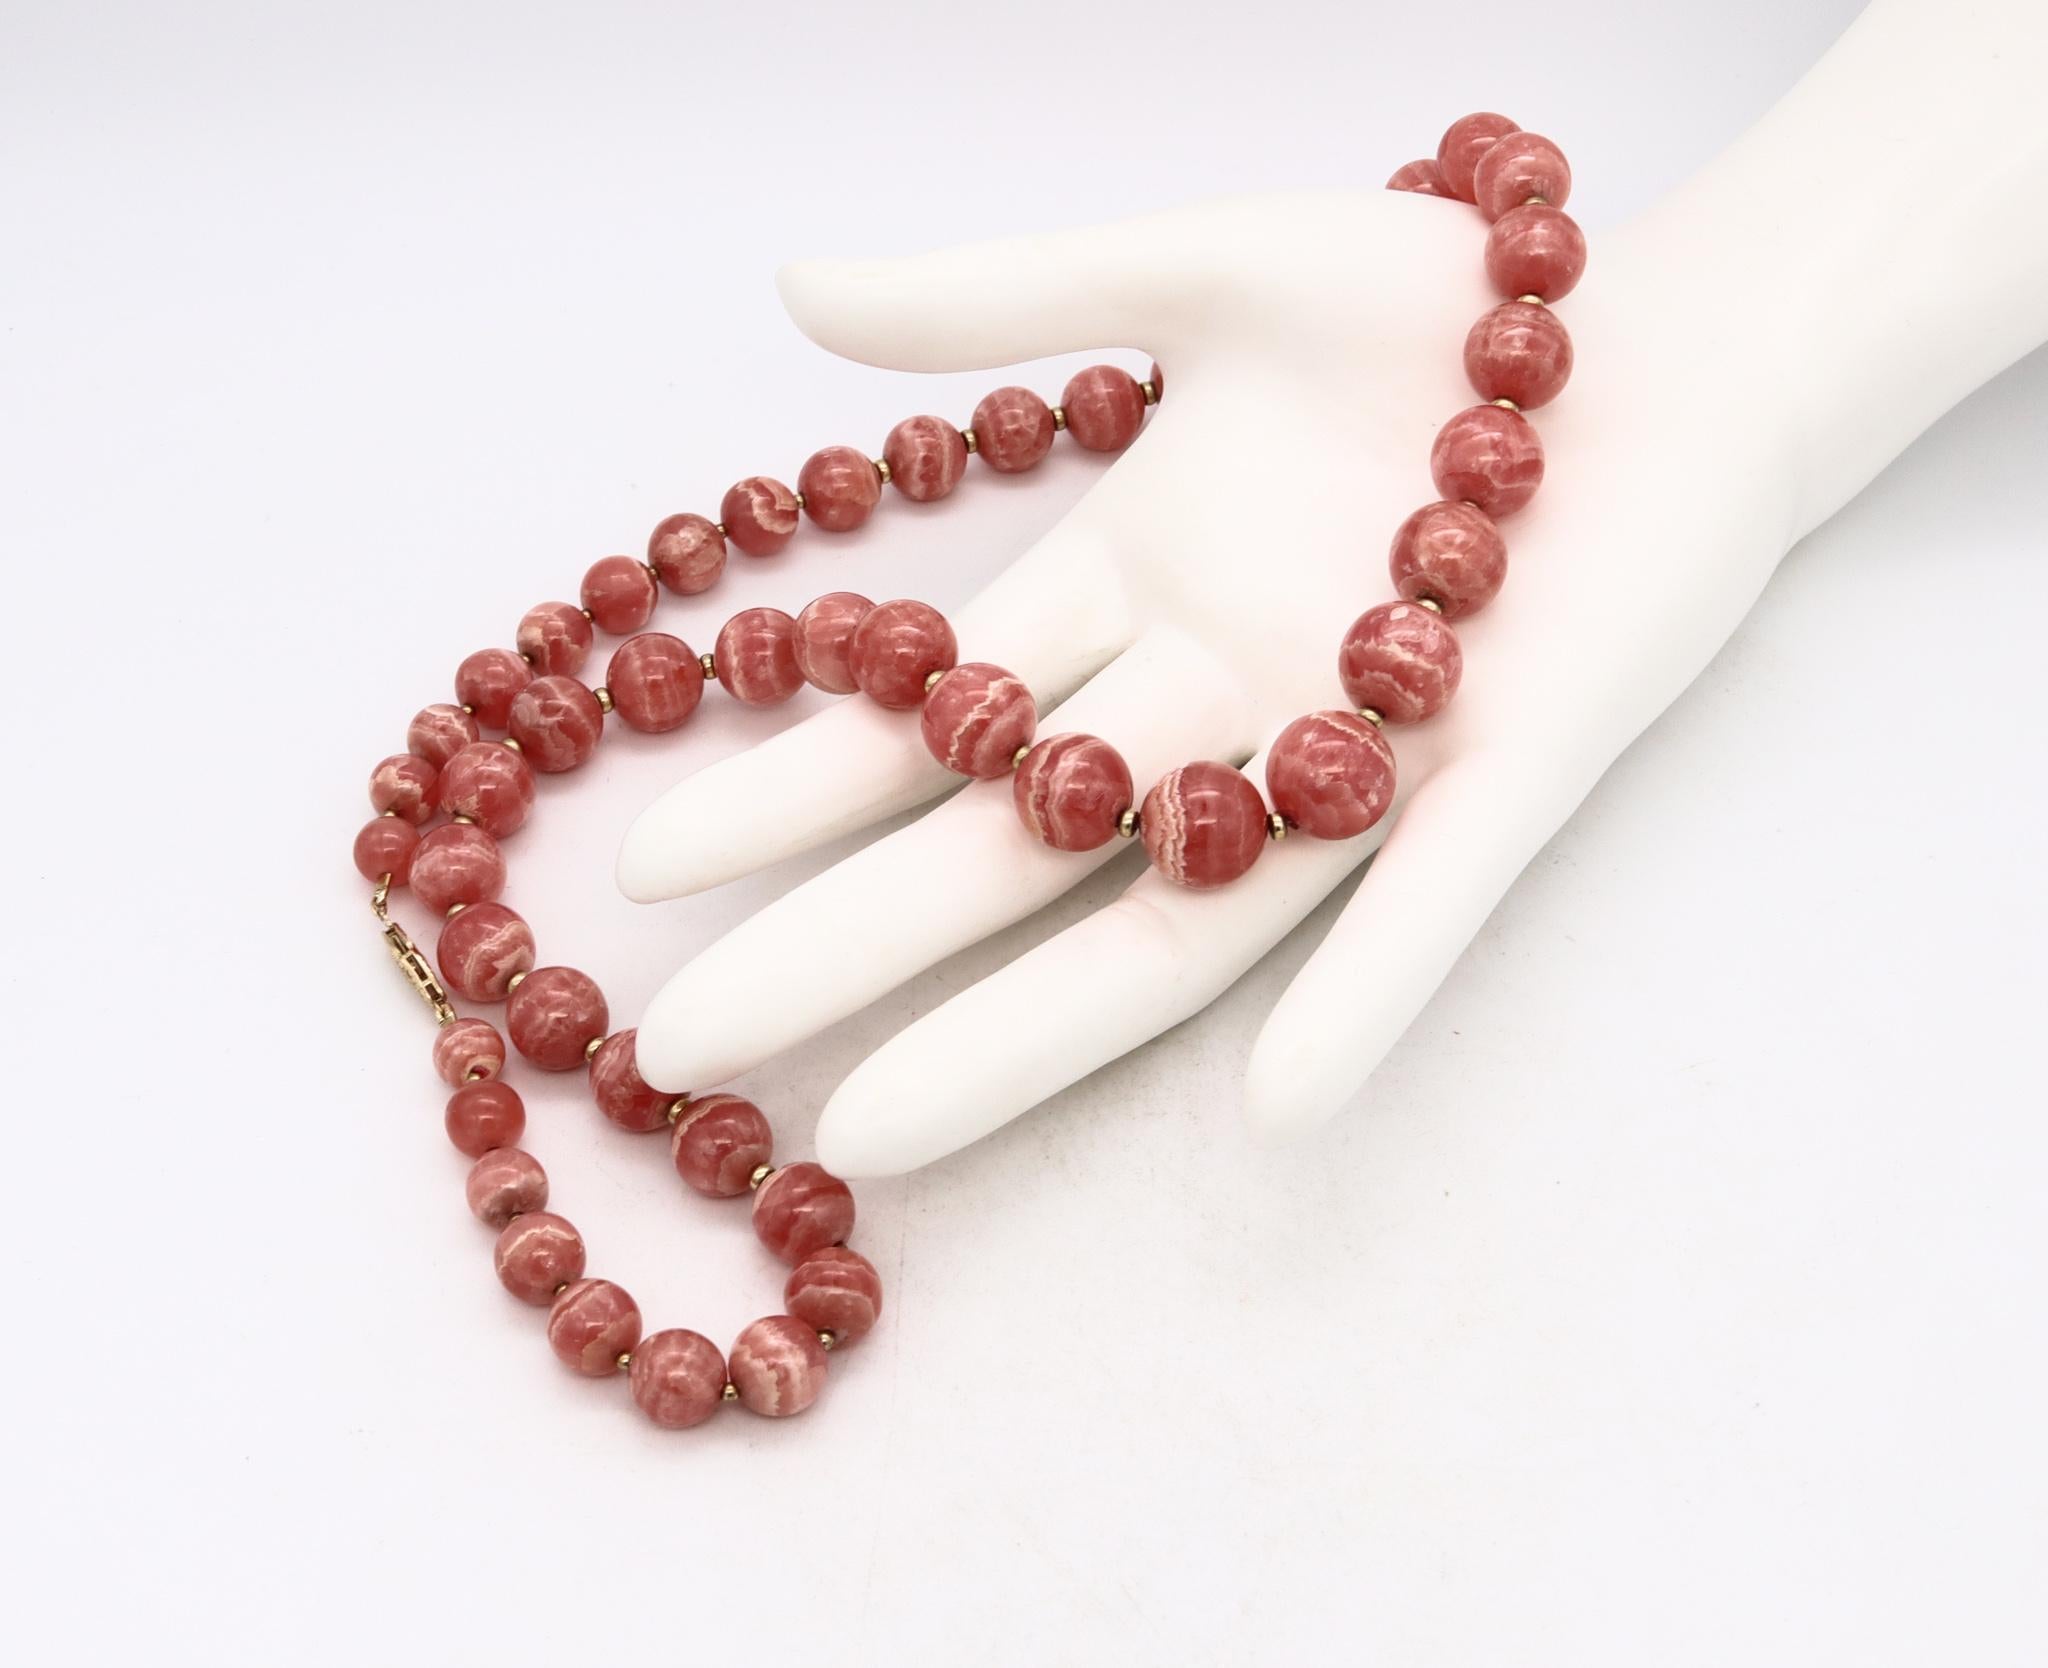 Bead Rhodochrosite Graduated Necklace in 18Kt Gold with 645.25 Cts Superb Gemstones For Sale